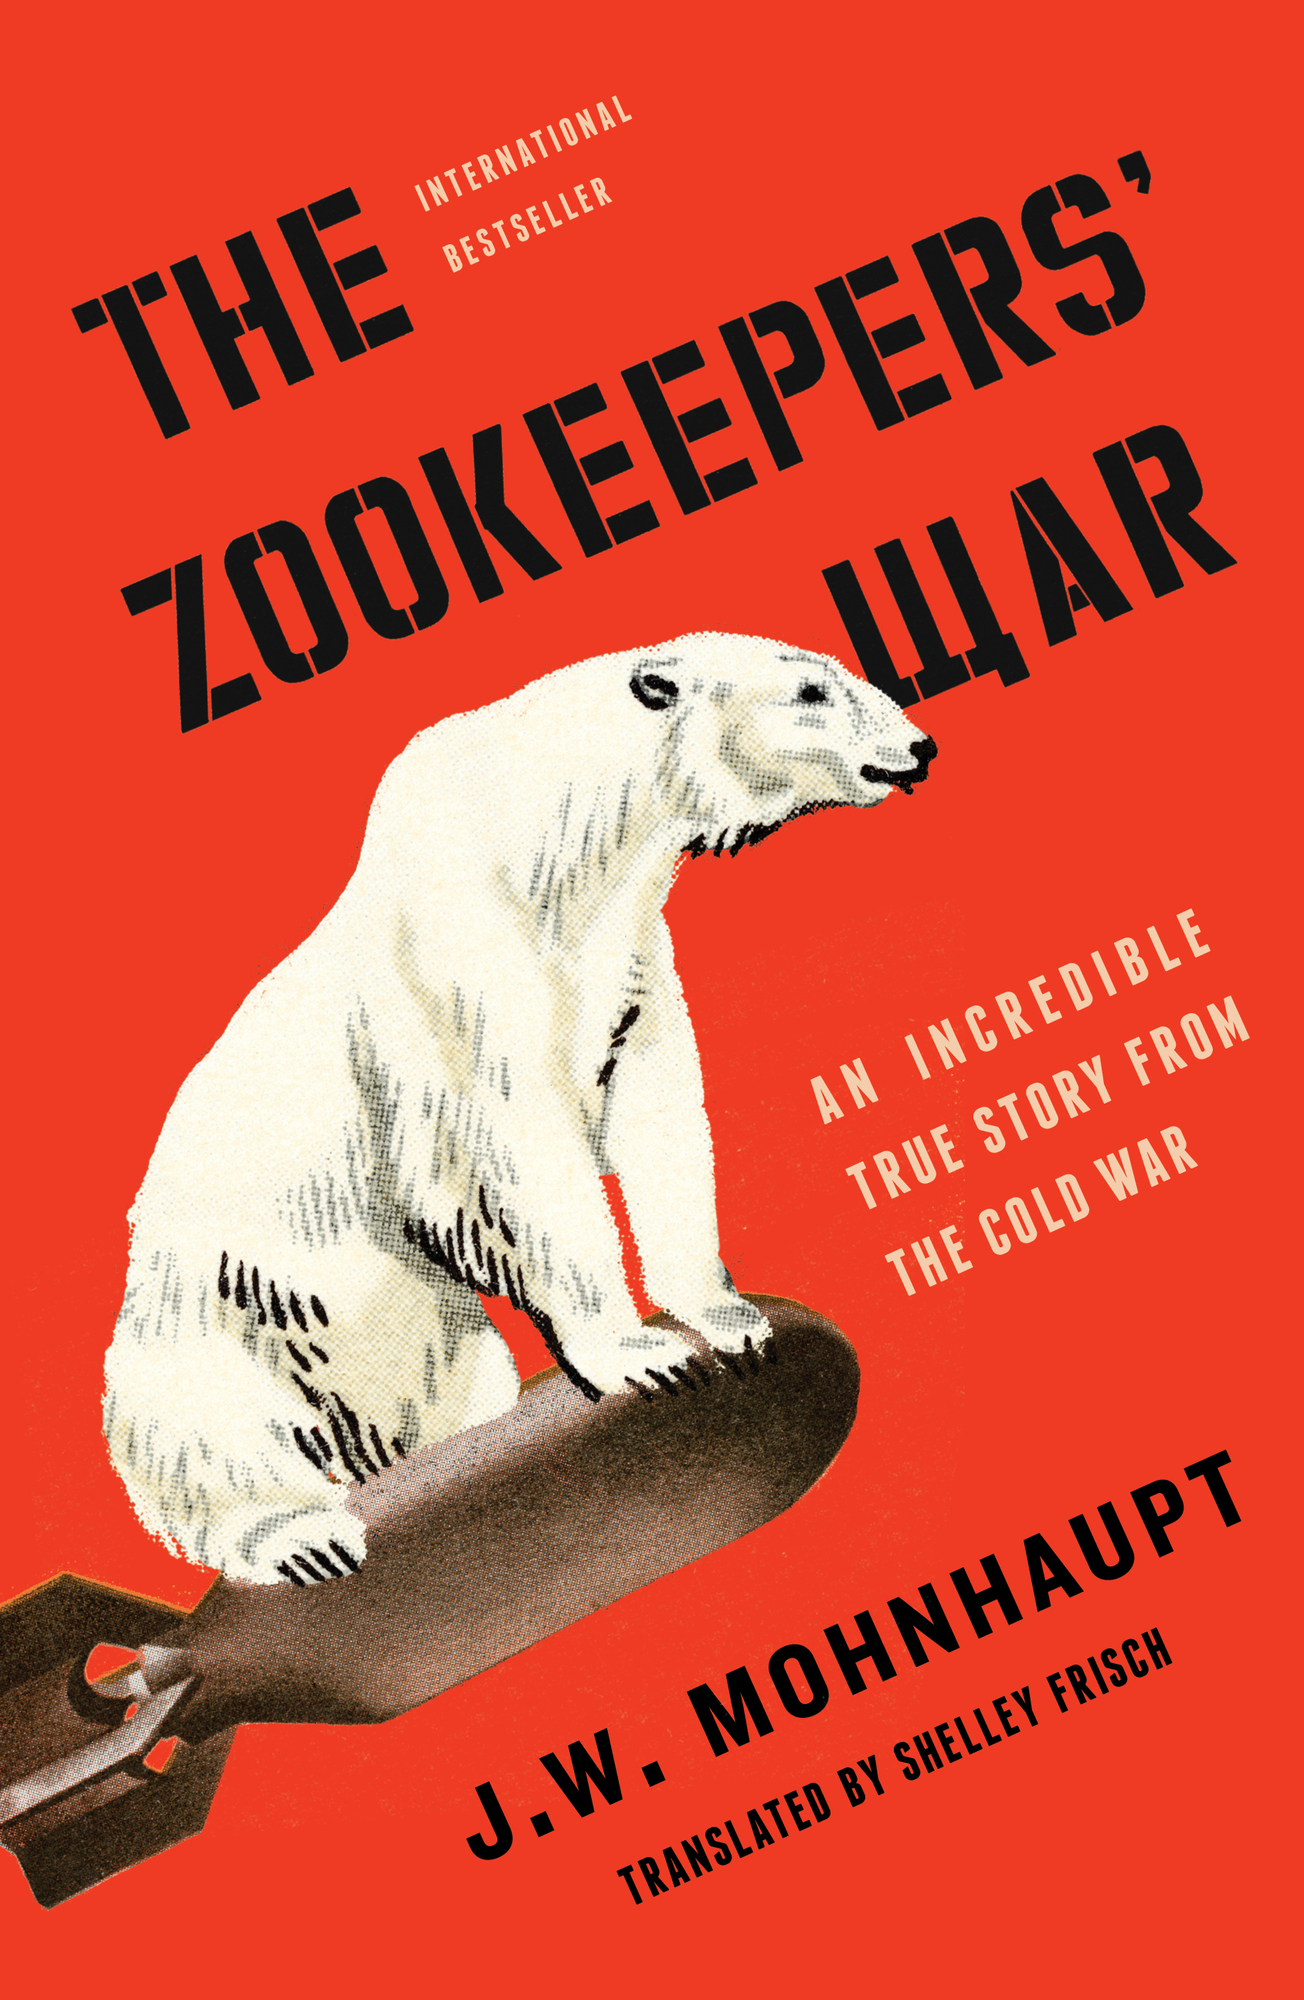 “The Zookeepers’ War” by J.W. Mohnhaupt